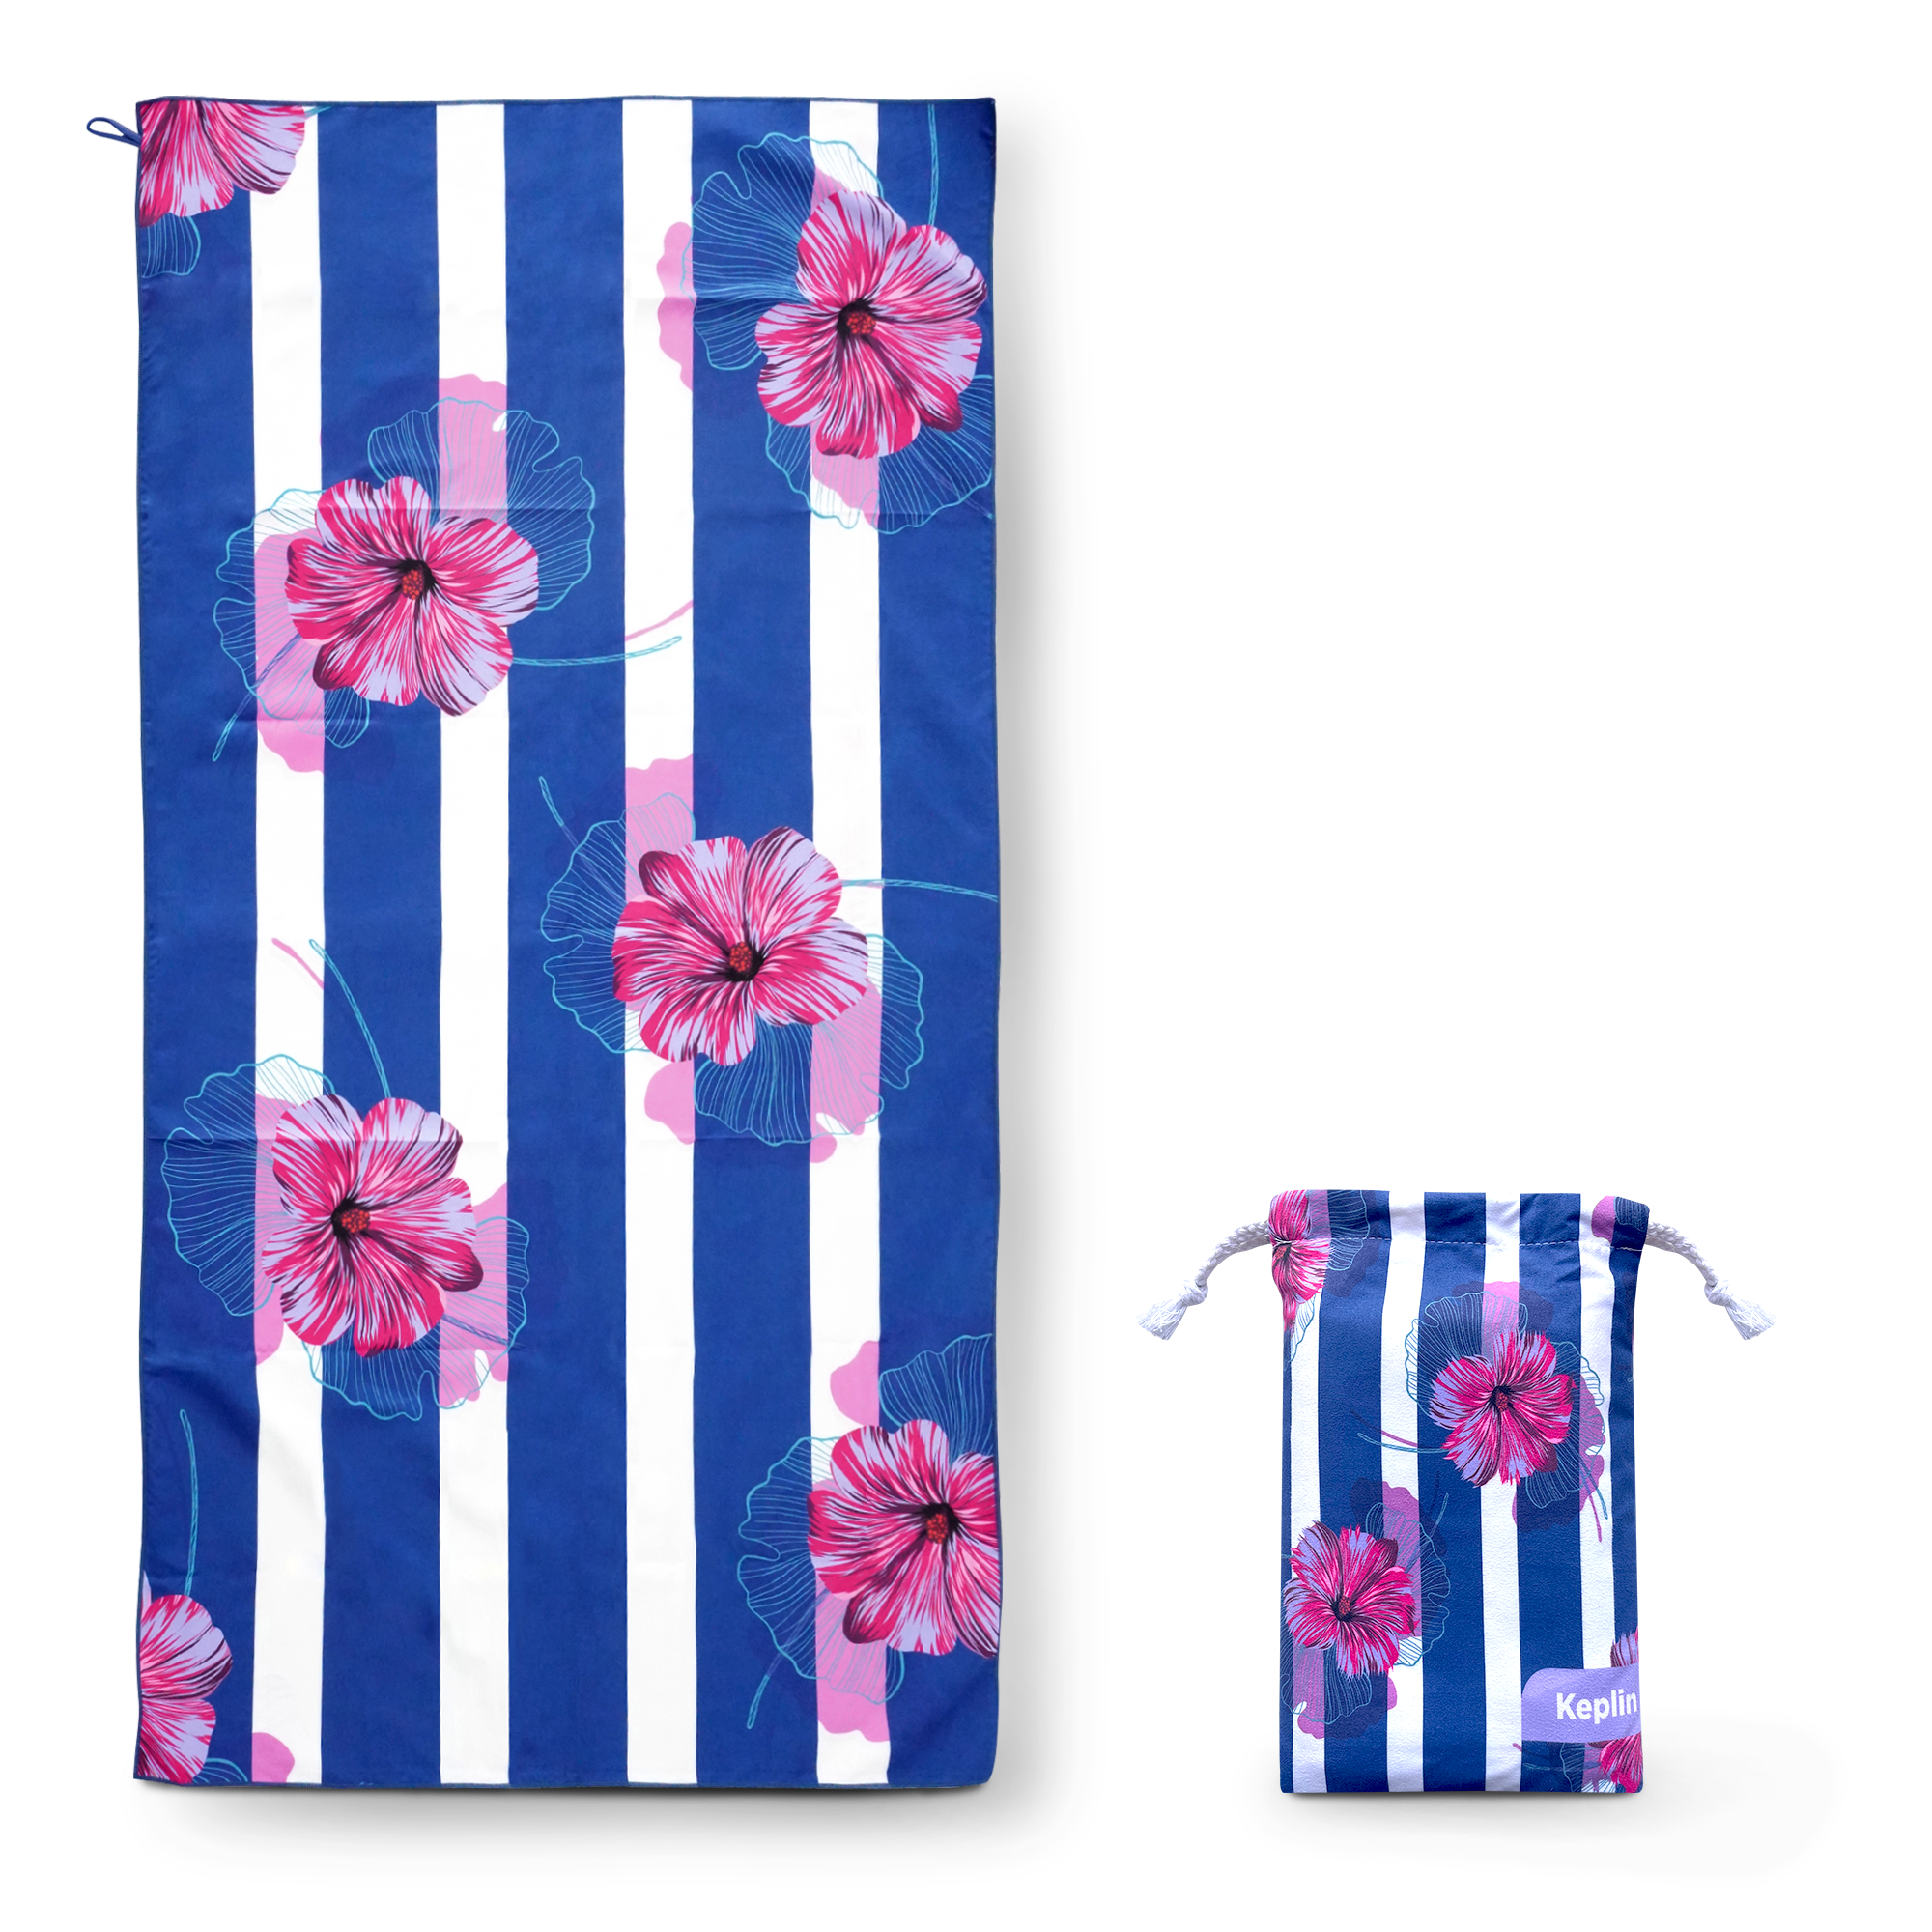 Microfibre Beach Towels for Adults & Kids - Absorbent and Fast Drying for Travel, Swimming Pool